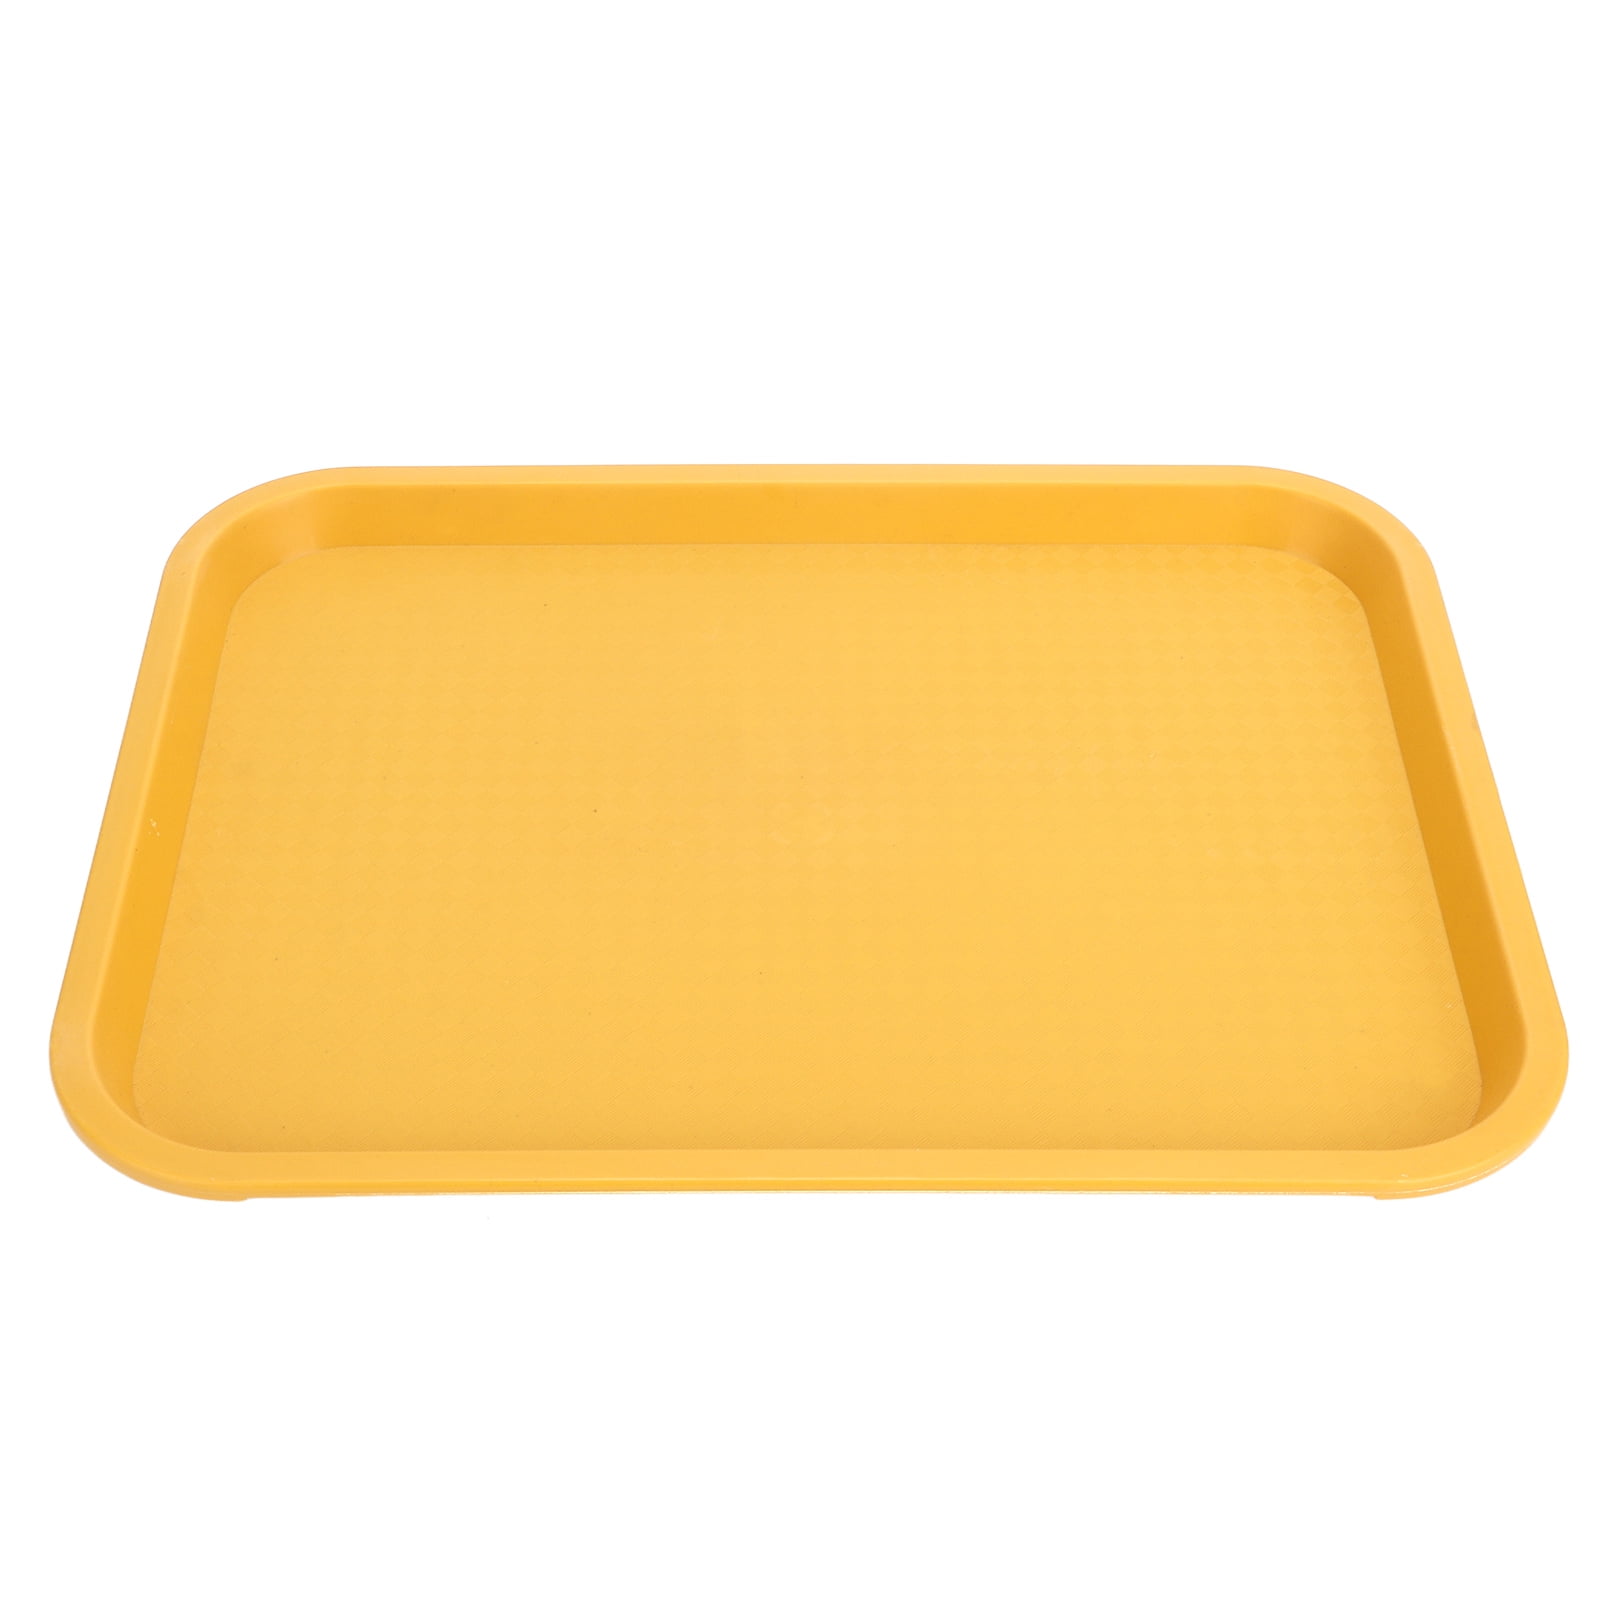 Rectangular Plastic Serving Tray Anti-deform Snack Tray with